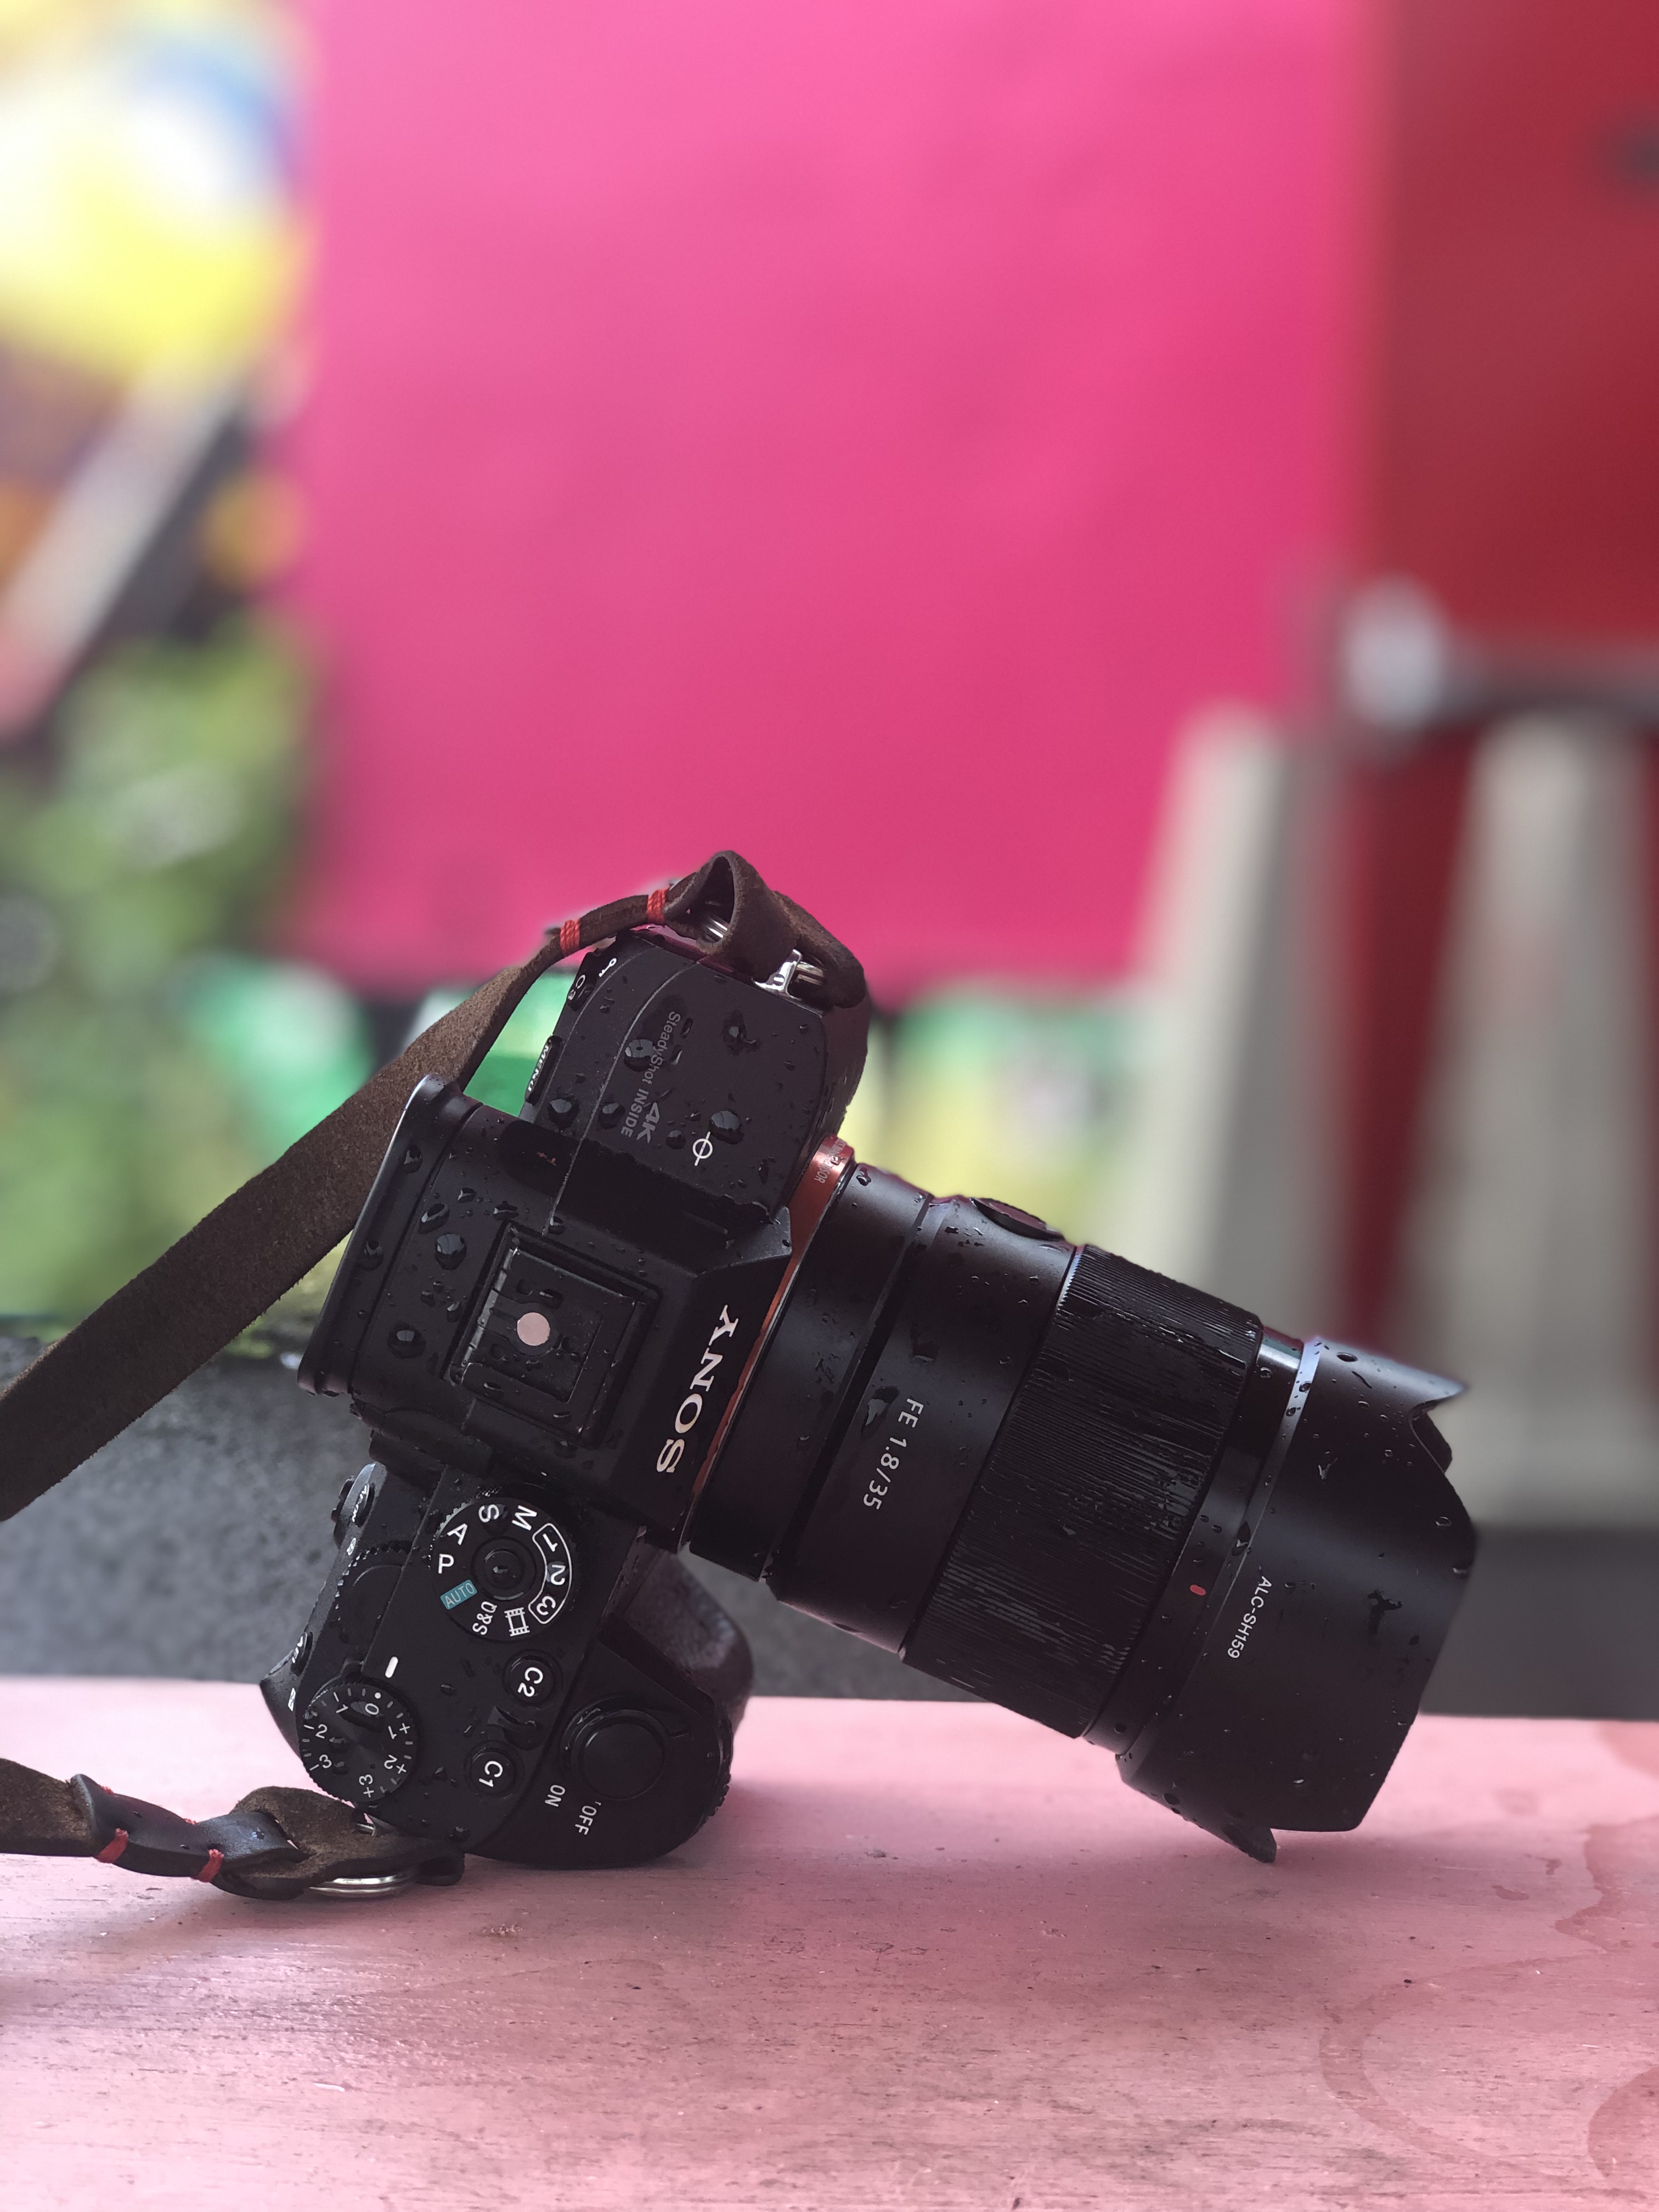 Sony 35mm f1.8 FE Weather sealing review test image